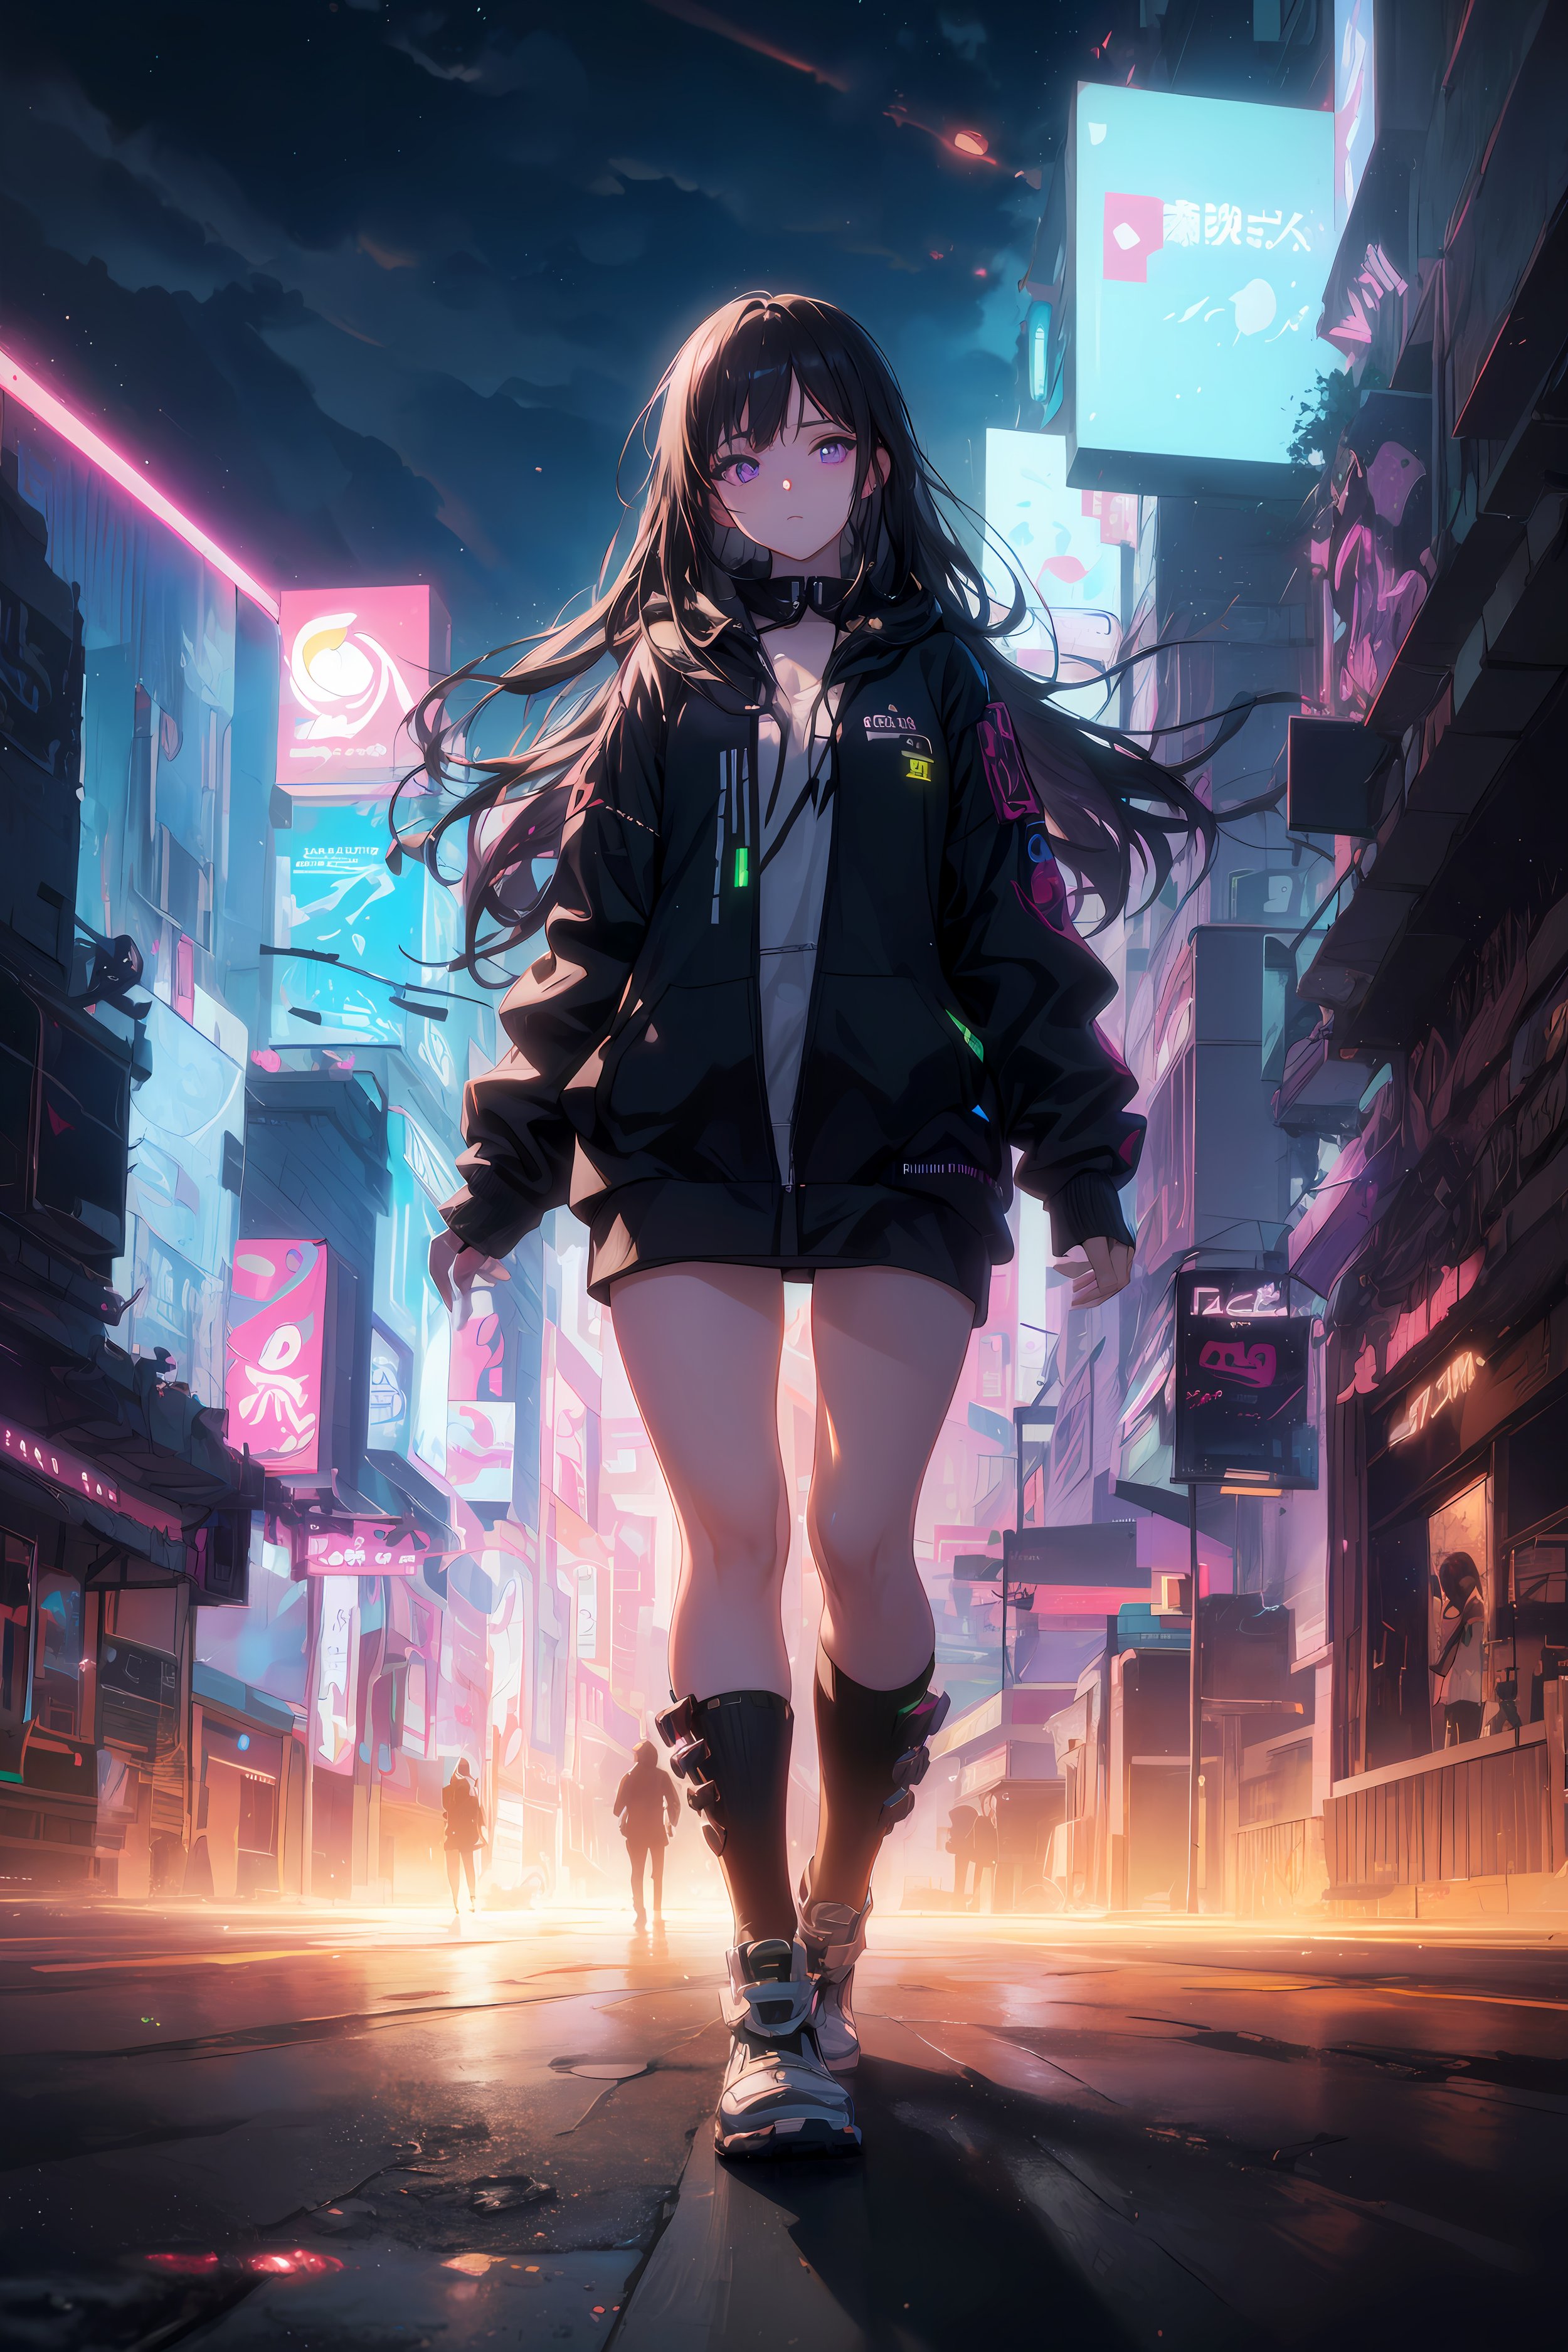 Home of the Cyberpunk 2077 universe — games, anime & more-baongoctrading.com.vn